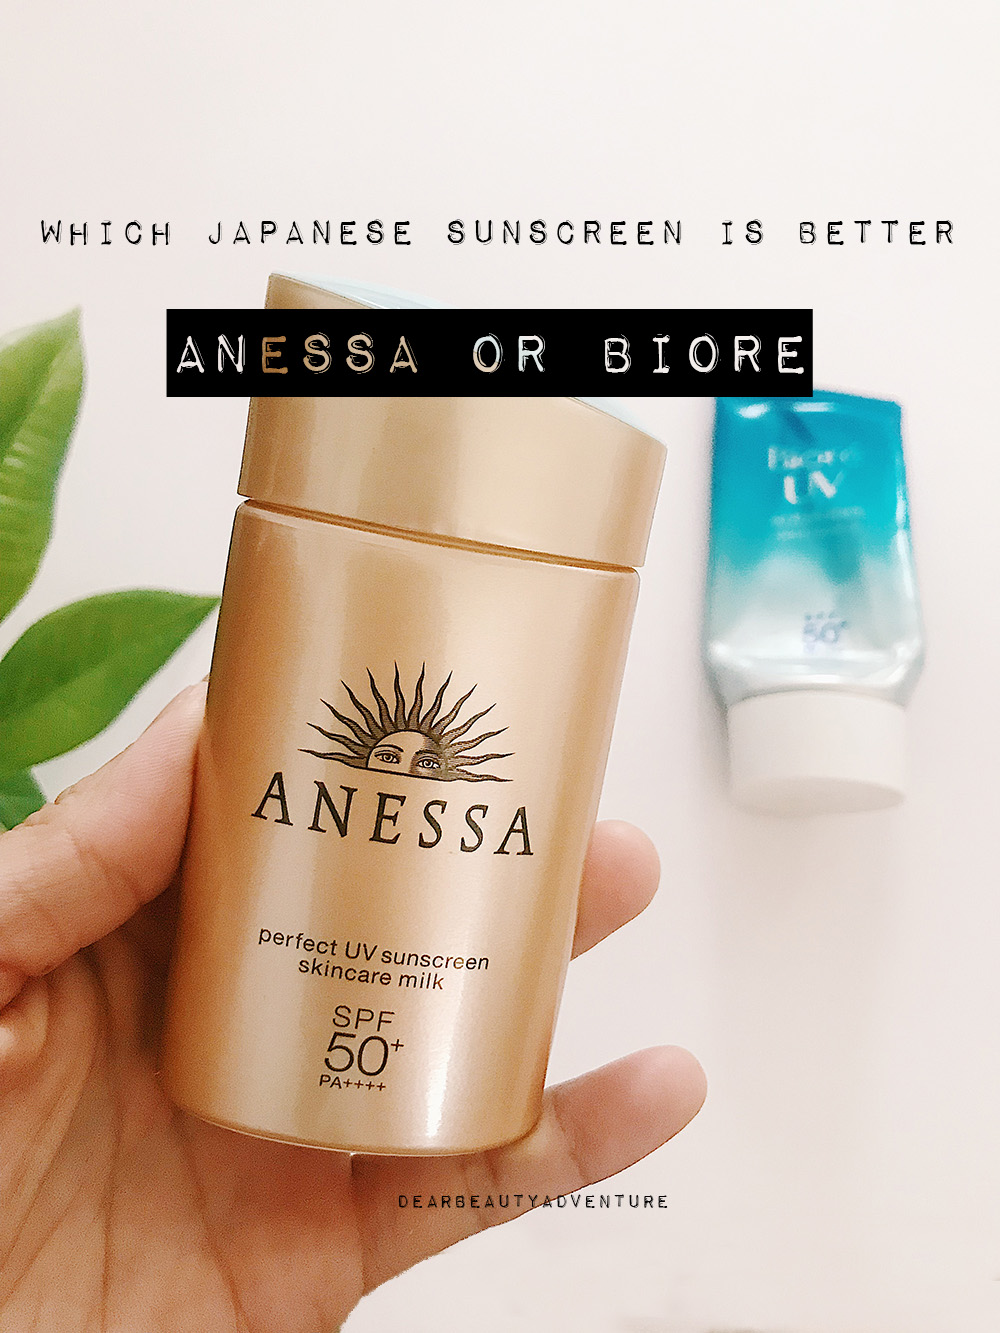 Biore or anessa japanese sunscreen, which is better